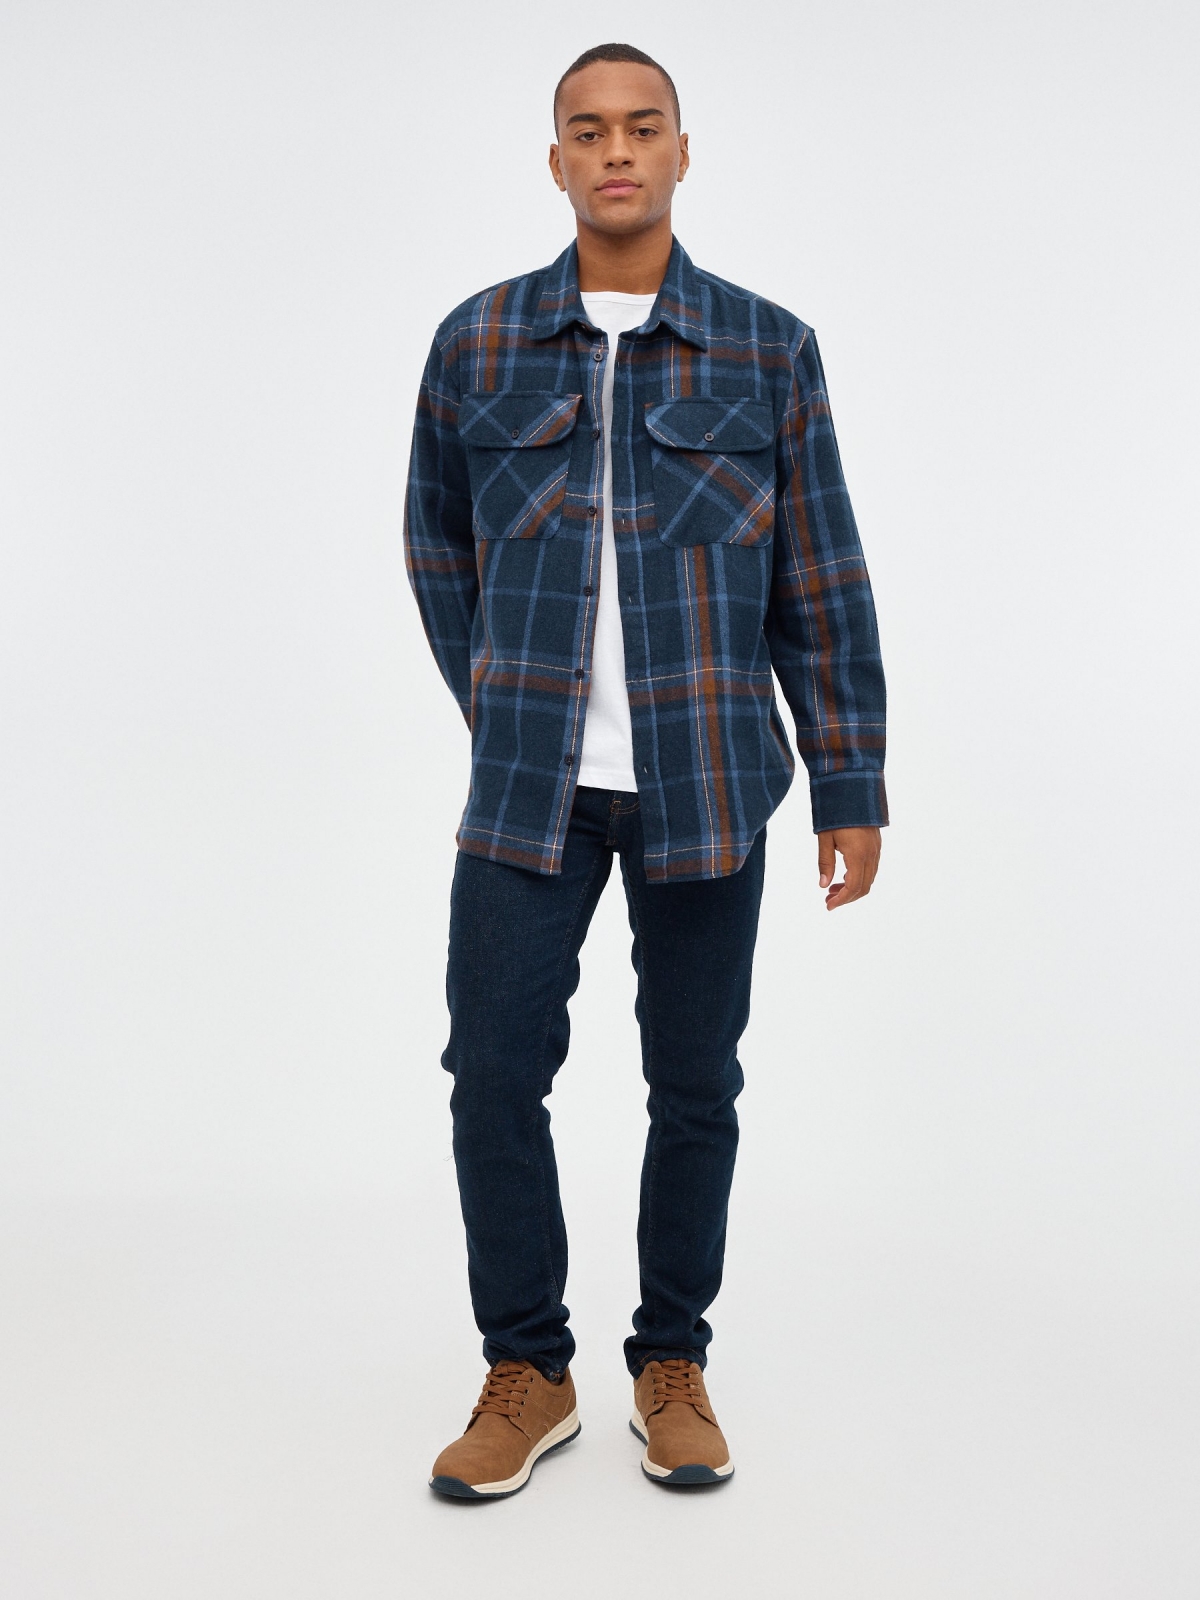 Plaid overshirt with pockets blue front view